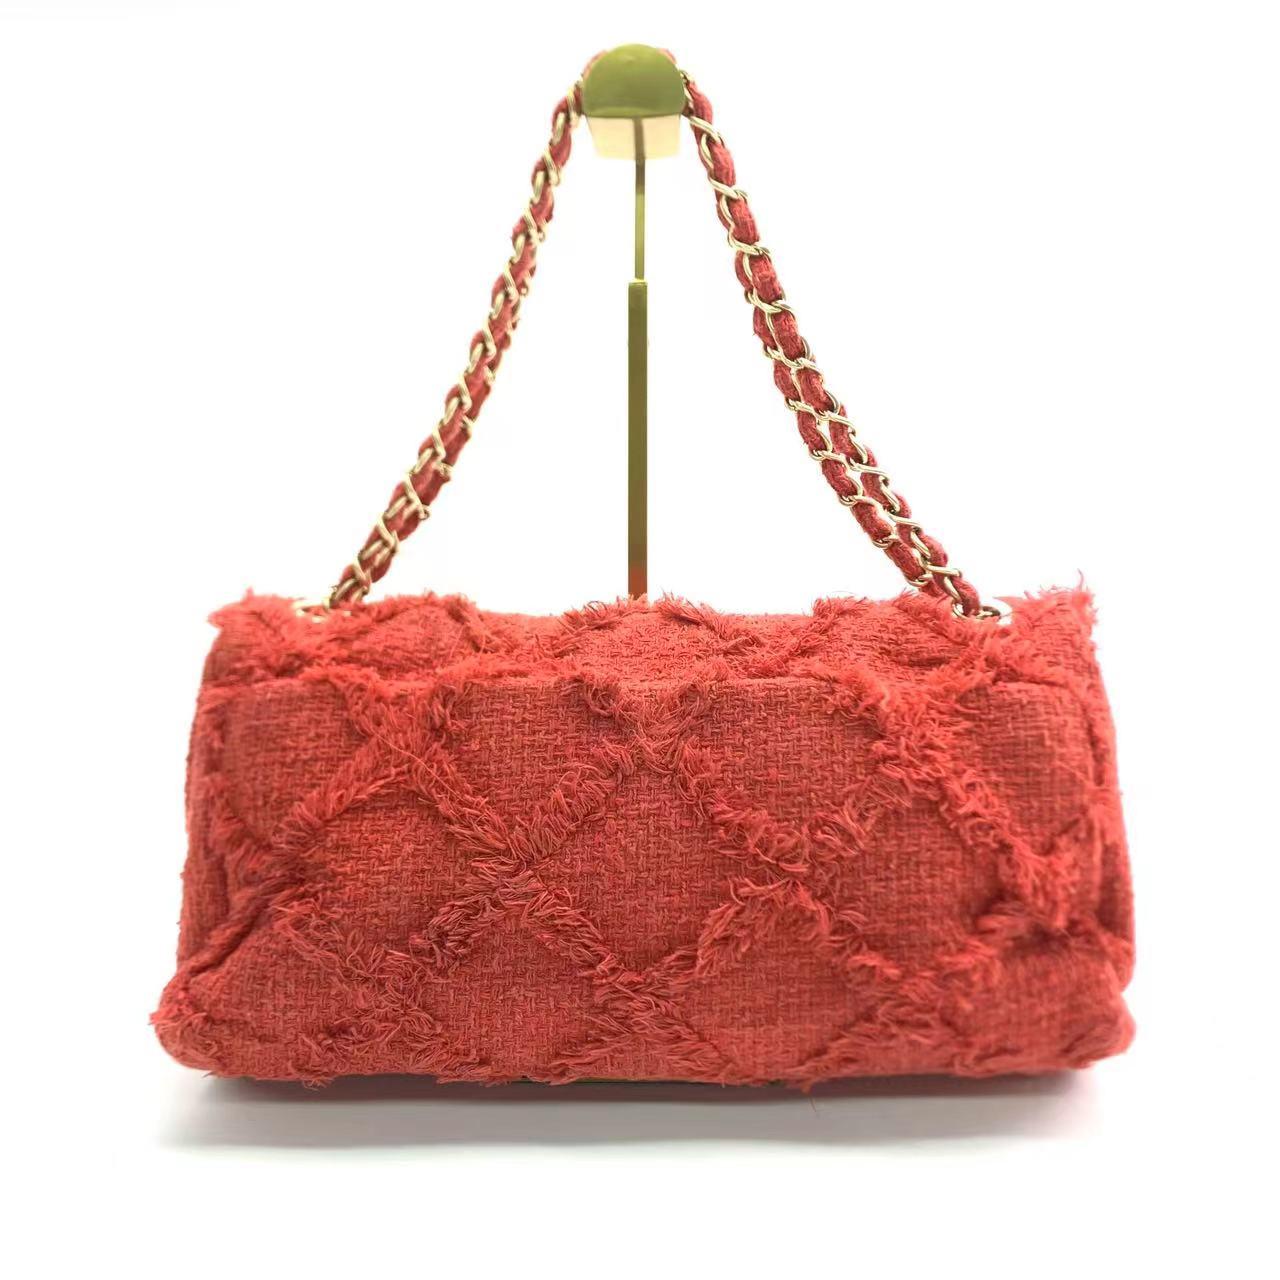 Unleash your inner boldness with the Chanel Red Diamond Stitch Tweed Maxi Nature Flap Bag. This posh and elegant bag is crafted from tweed and adorned with the signature diamond pattern, making it a must-have for parties. Featuring the iconic CC